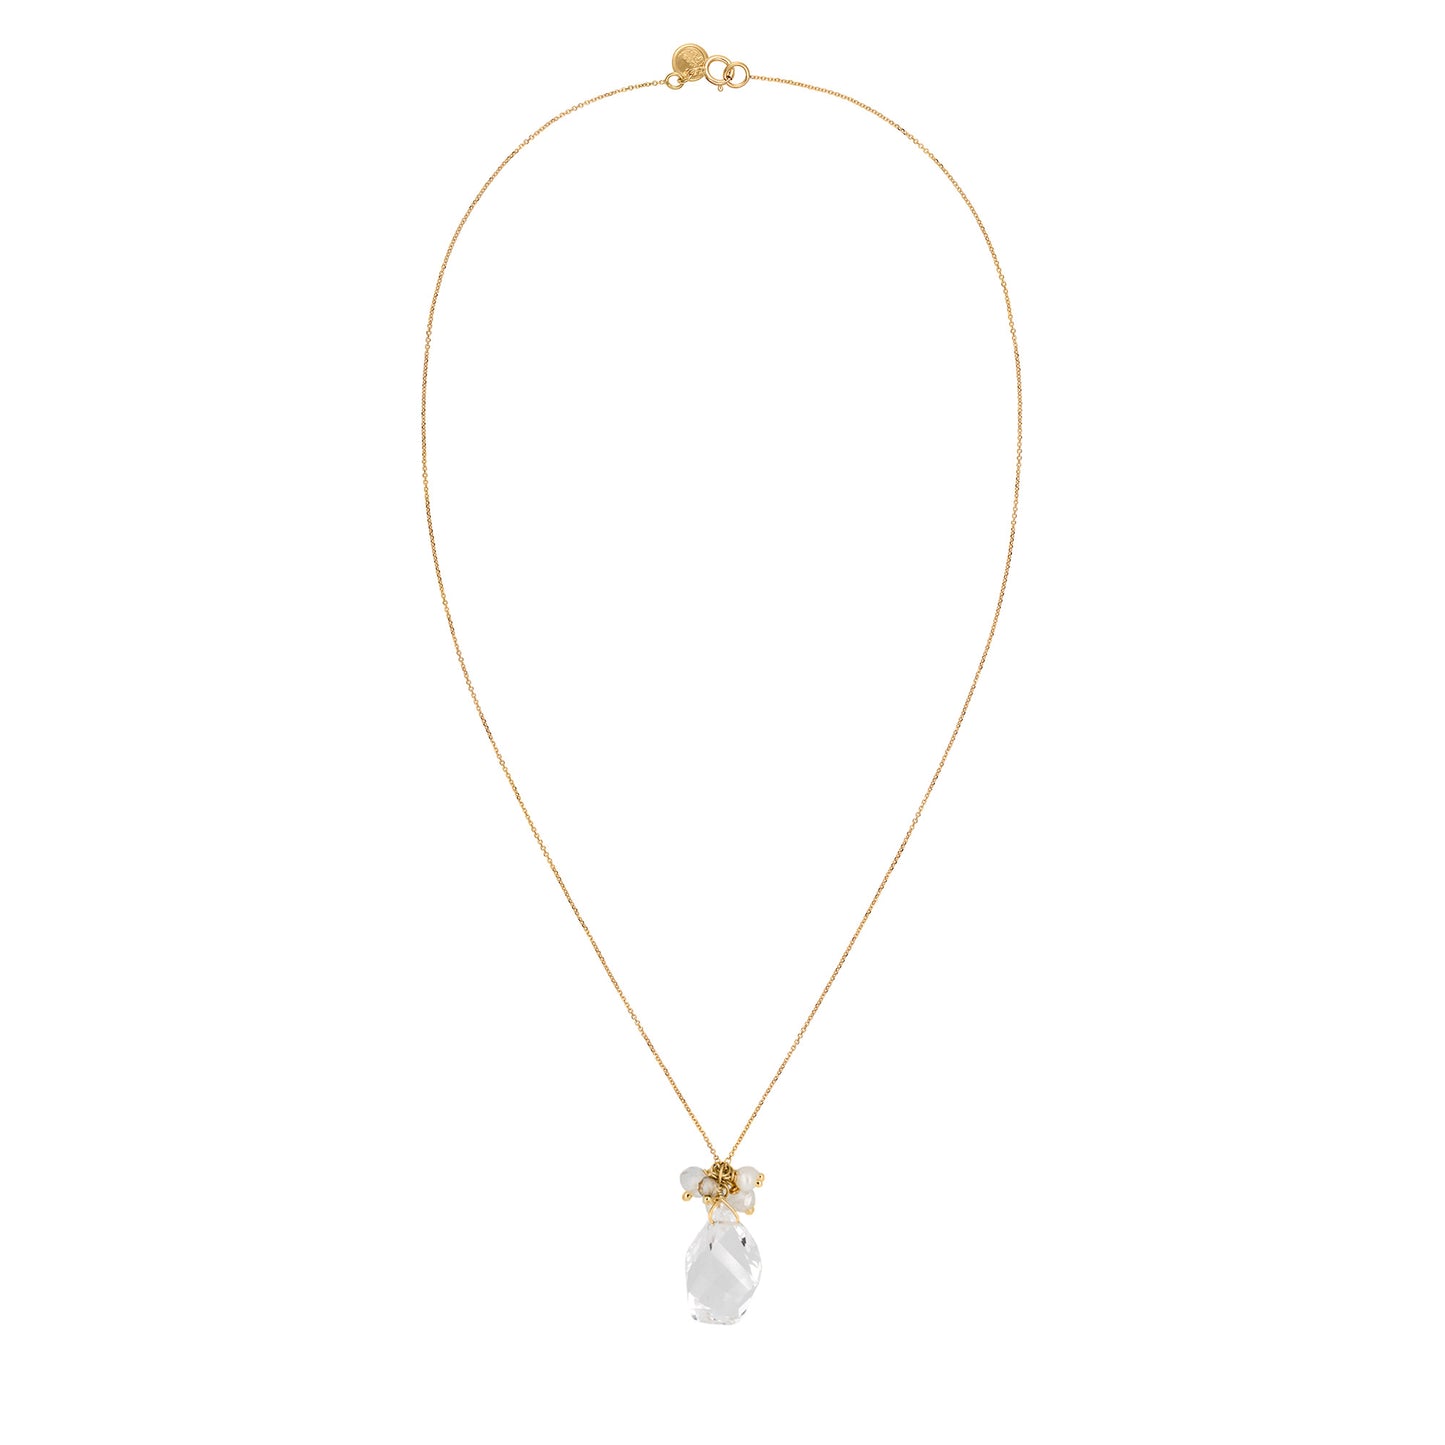 18ct Gold Goddess of Love necklace with clusters of Pearl and Crystal beads/drops.